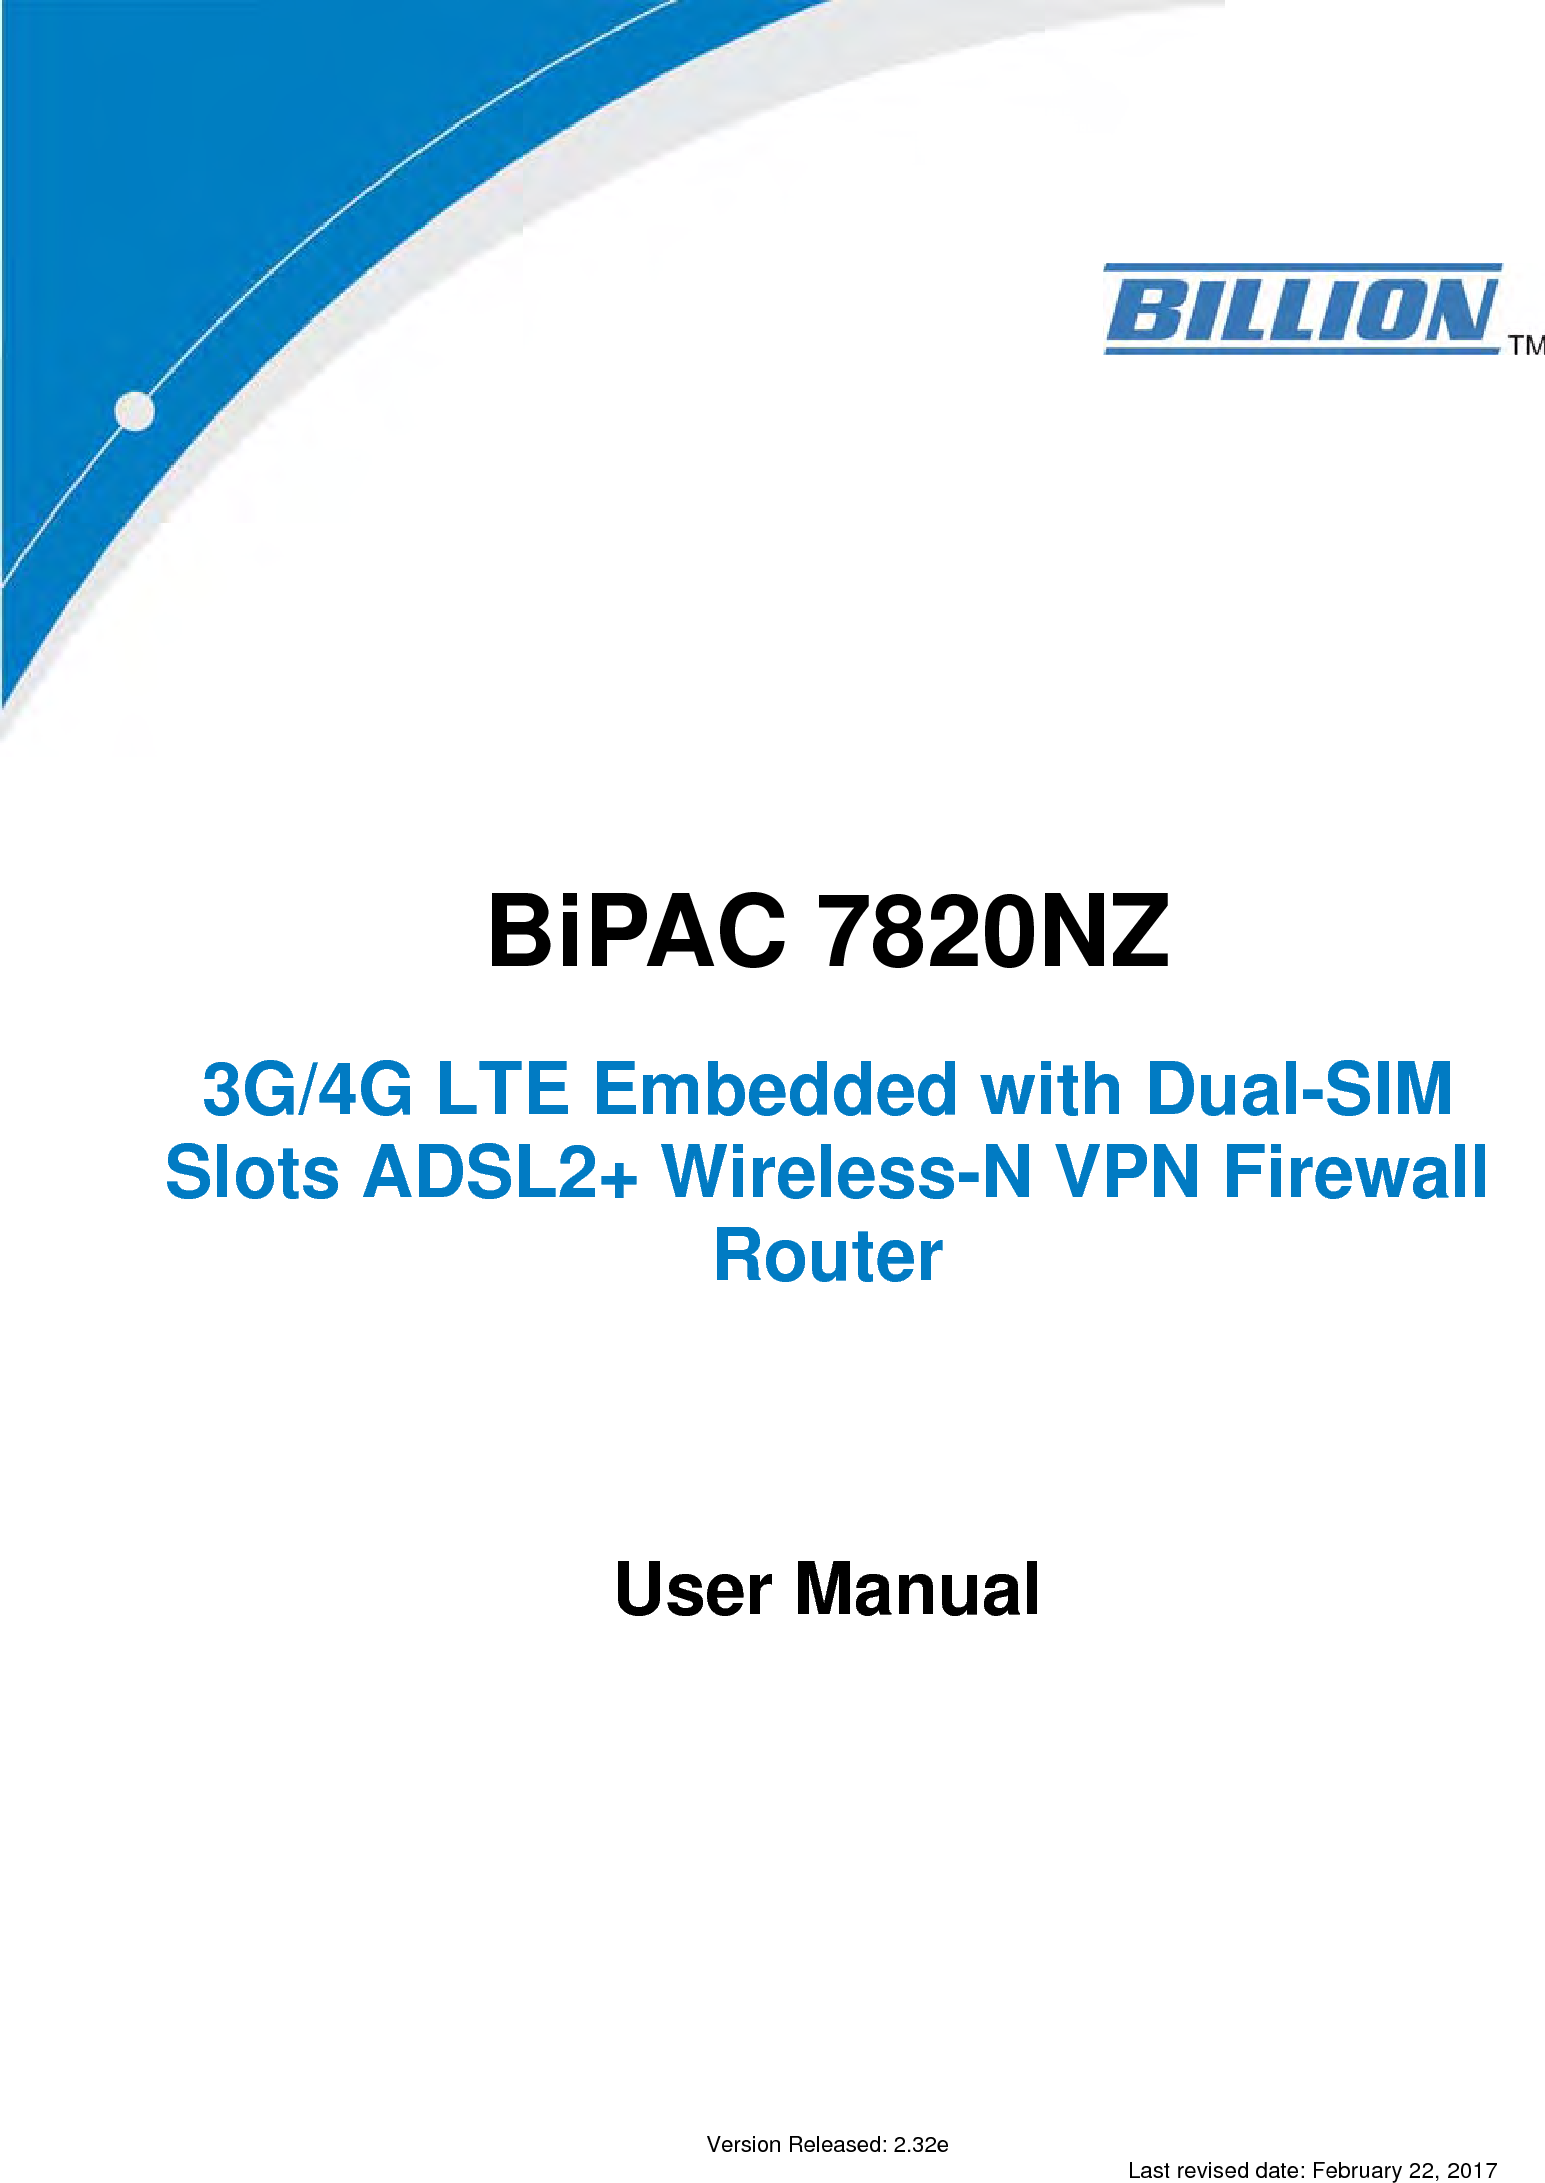                   BiPAC 7820NZ   3G/4G LTE Embedded with Dual-SIM Slots ADSL2+ Wireless-N VPN Firewall Router          User Manual                   Version Released: 2.32e Last revised date: February 22, 2017 